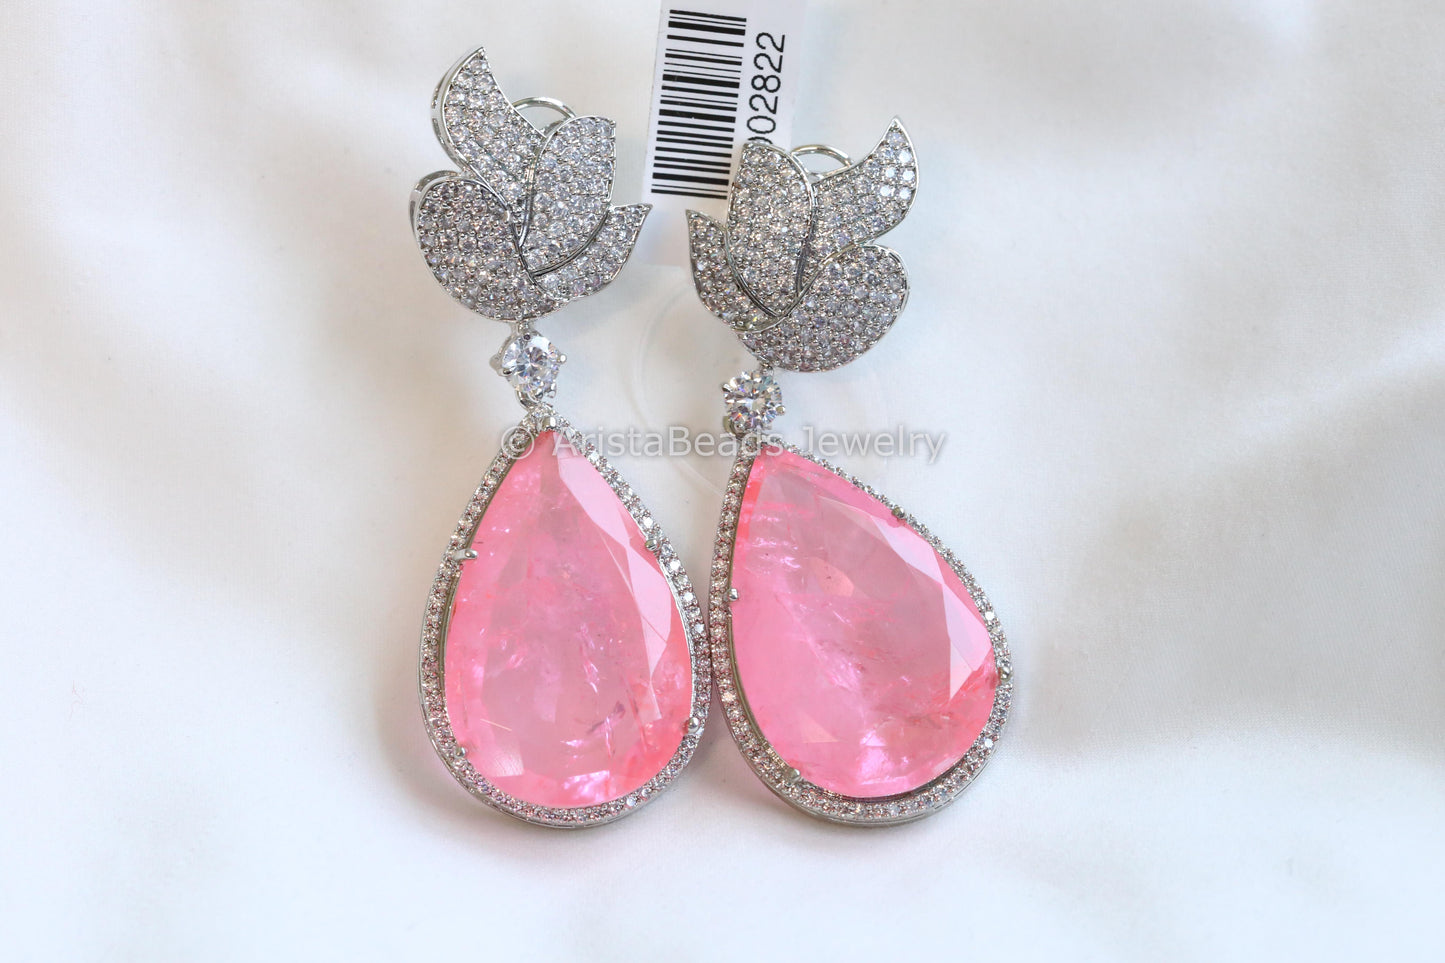 Extra Large Pink Doublet Earrings